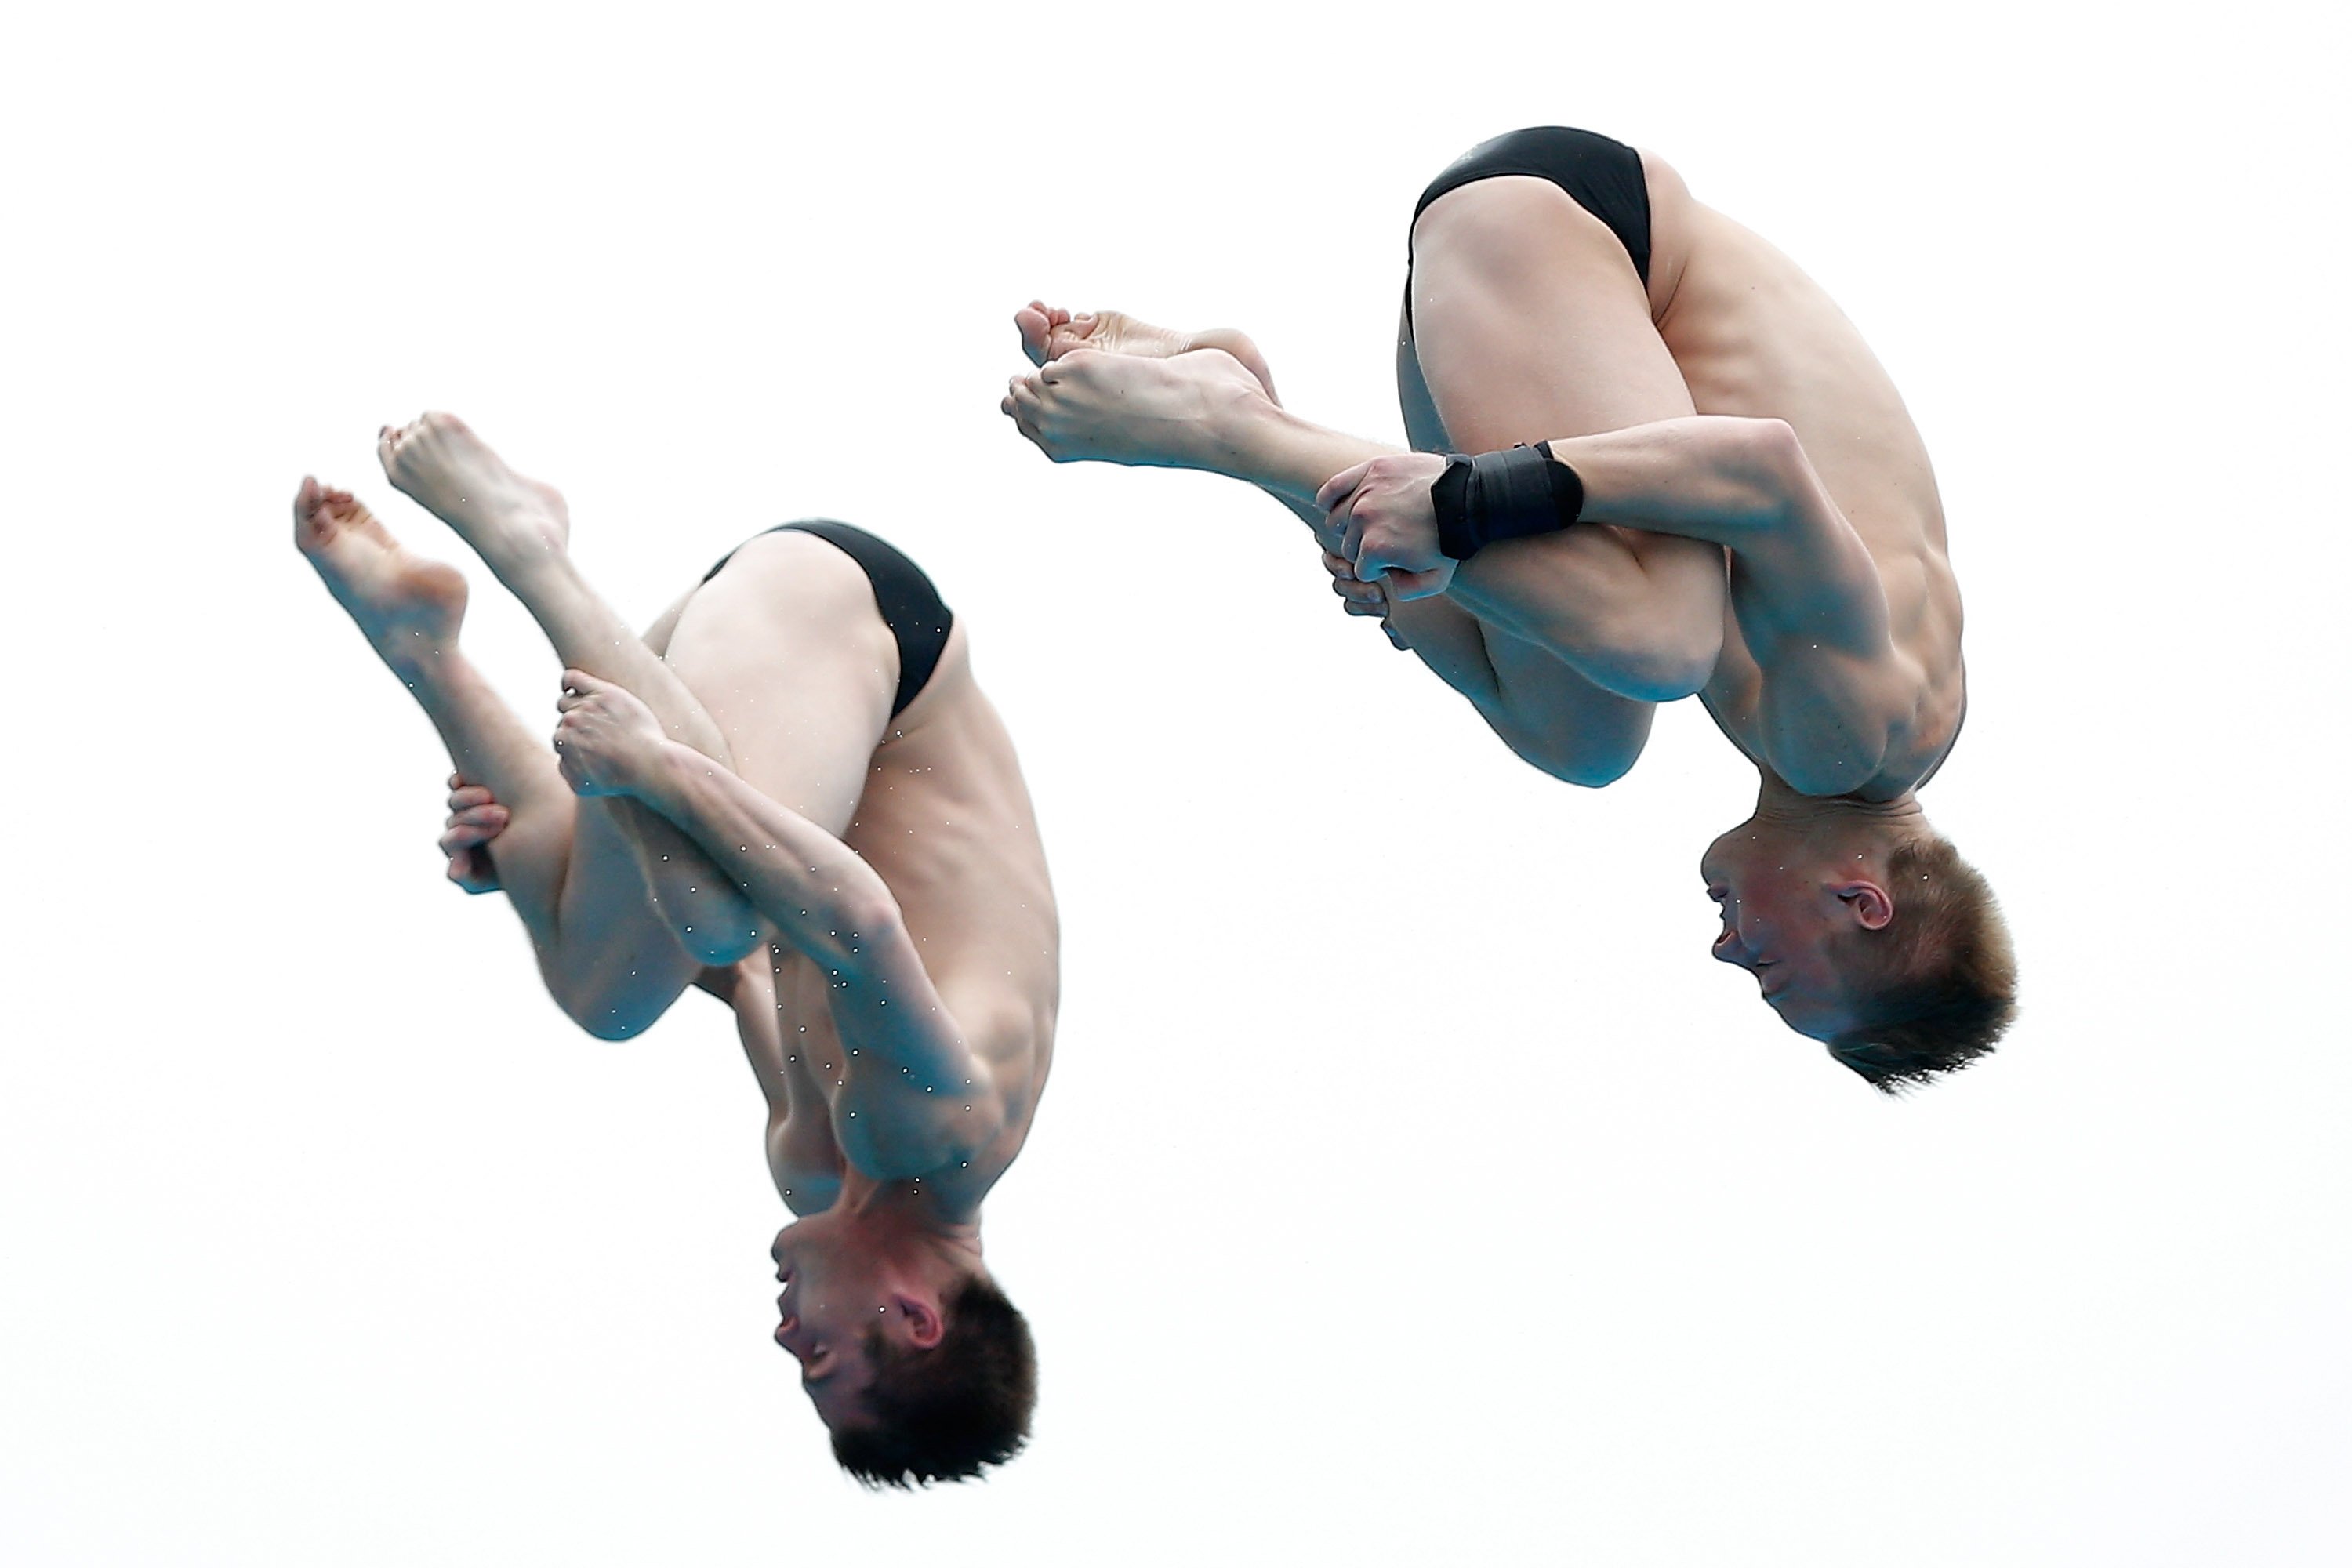 David Boudia and Steele Johnson of United States compete in the men's 10M Synchro Springboard Preliminary on day Two of the 19th FINA Diving World Cup at the Oriental Sports Center in Shanghai on July 16, 2014.